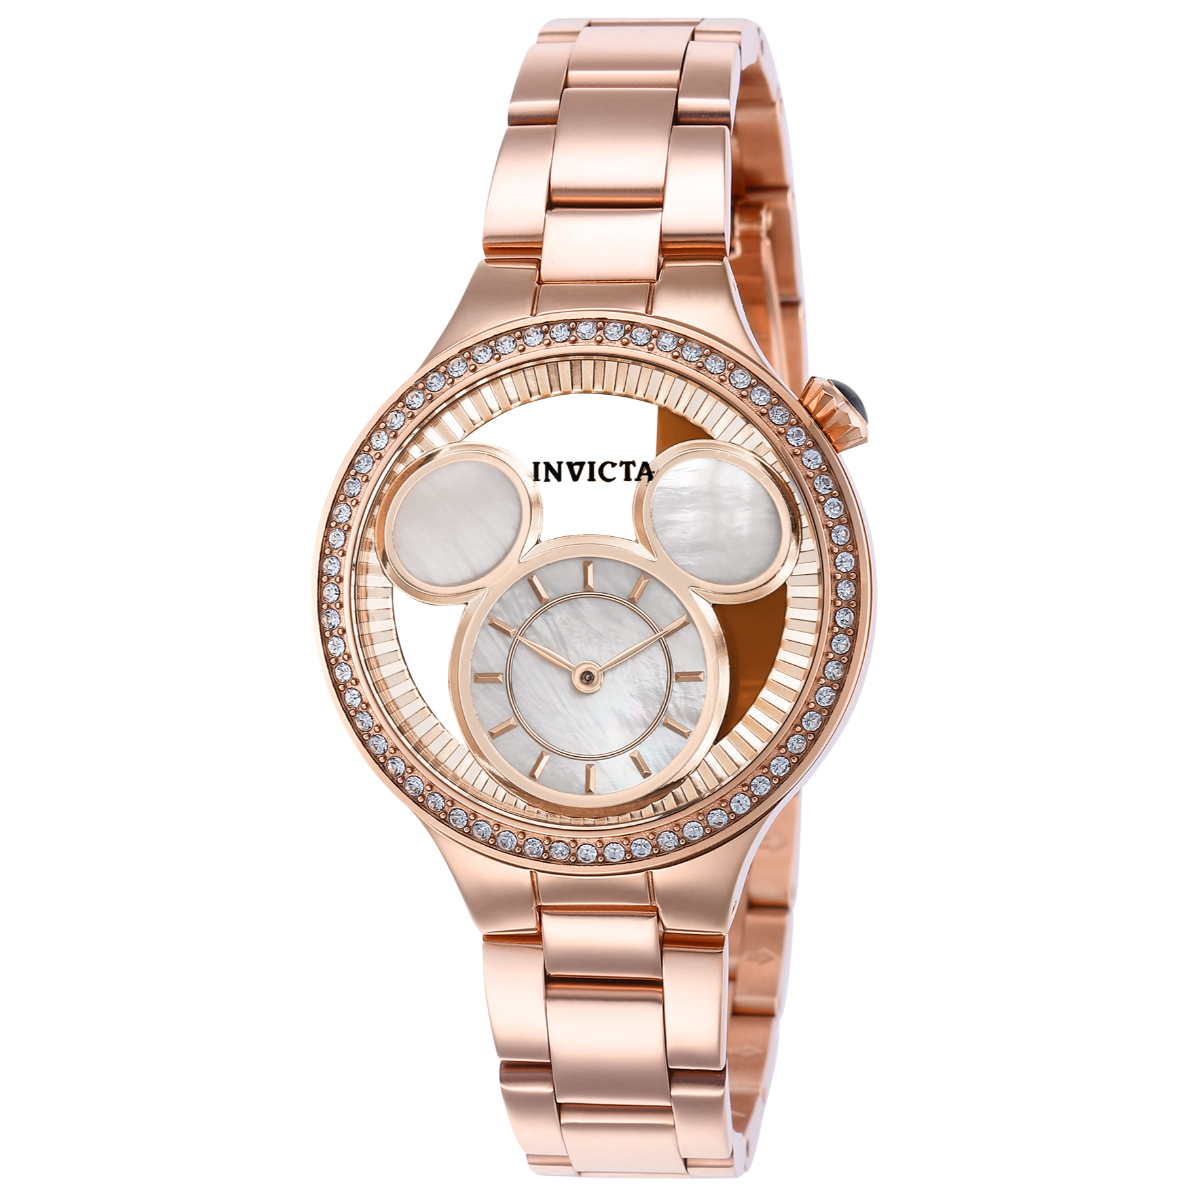 Invicta Disney Limited Edition Women's Watch w/ Metal & Mother of Pearl Dial - 35mm, Rose Gold (36267)